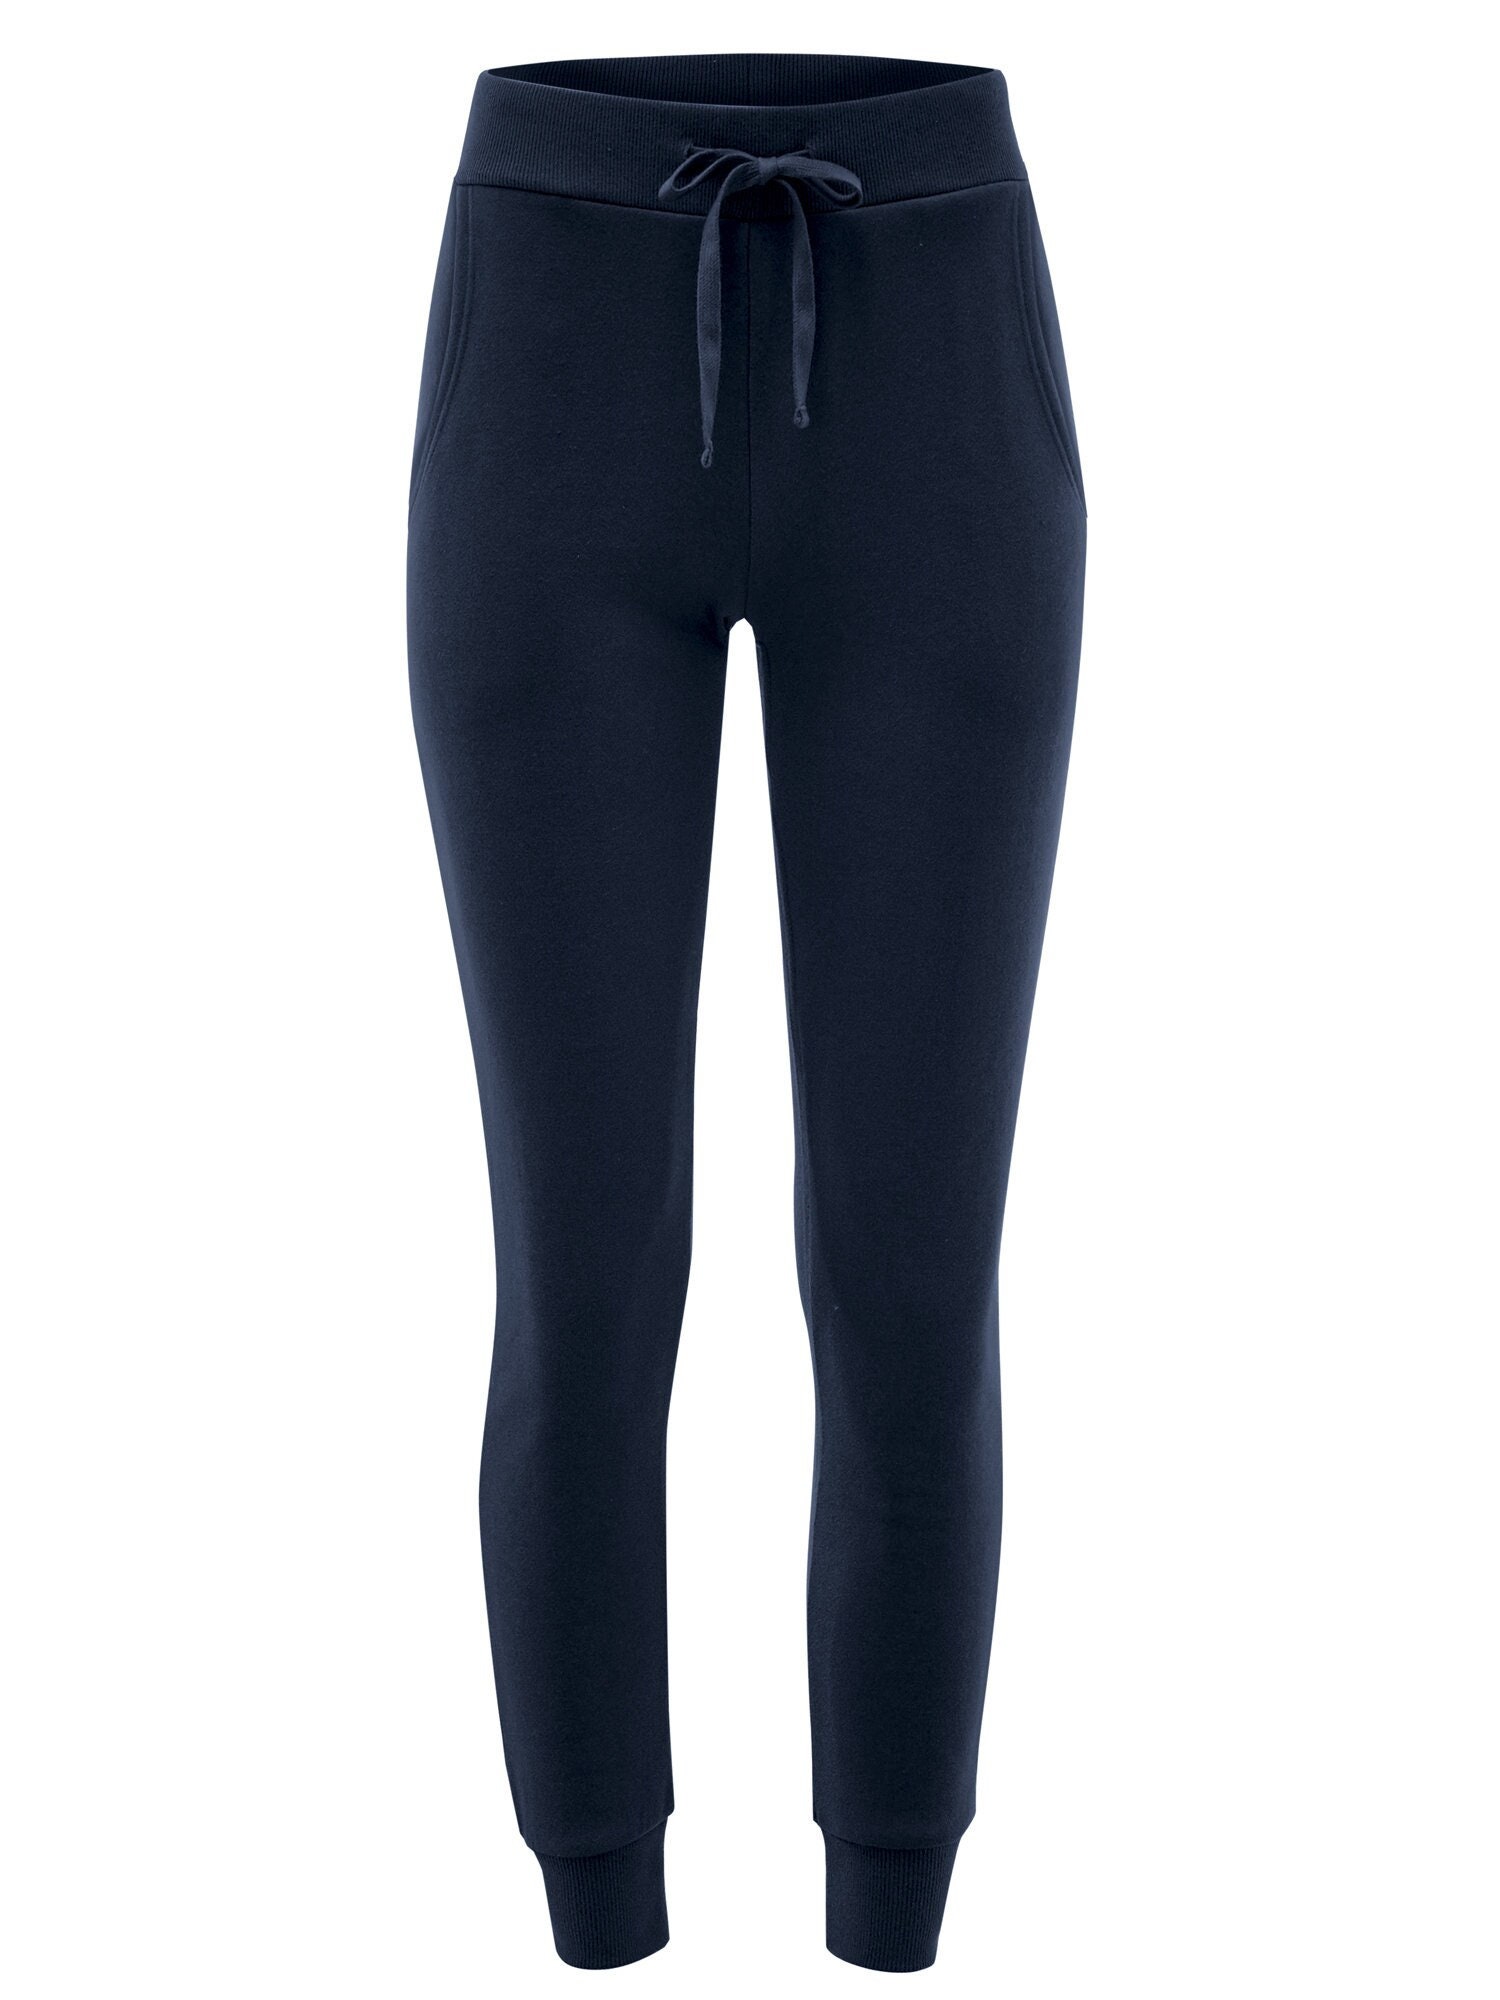 Buy Drysense Womens Navy Blue Solid Polyester Spandex Pants - M at